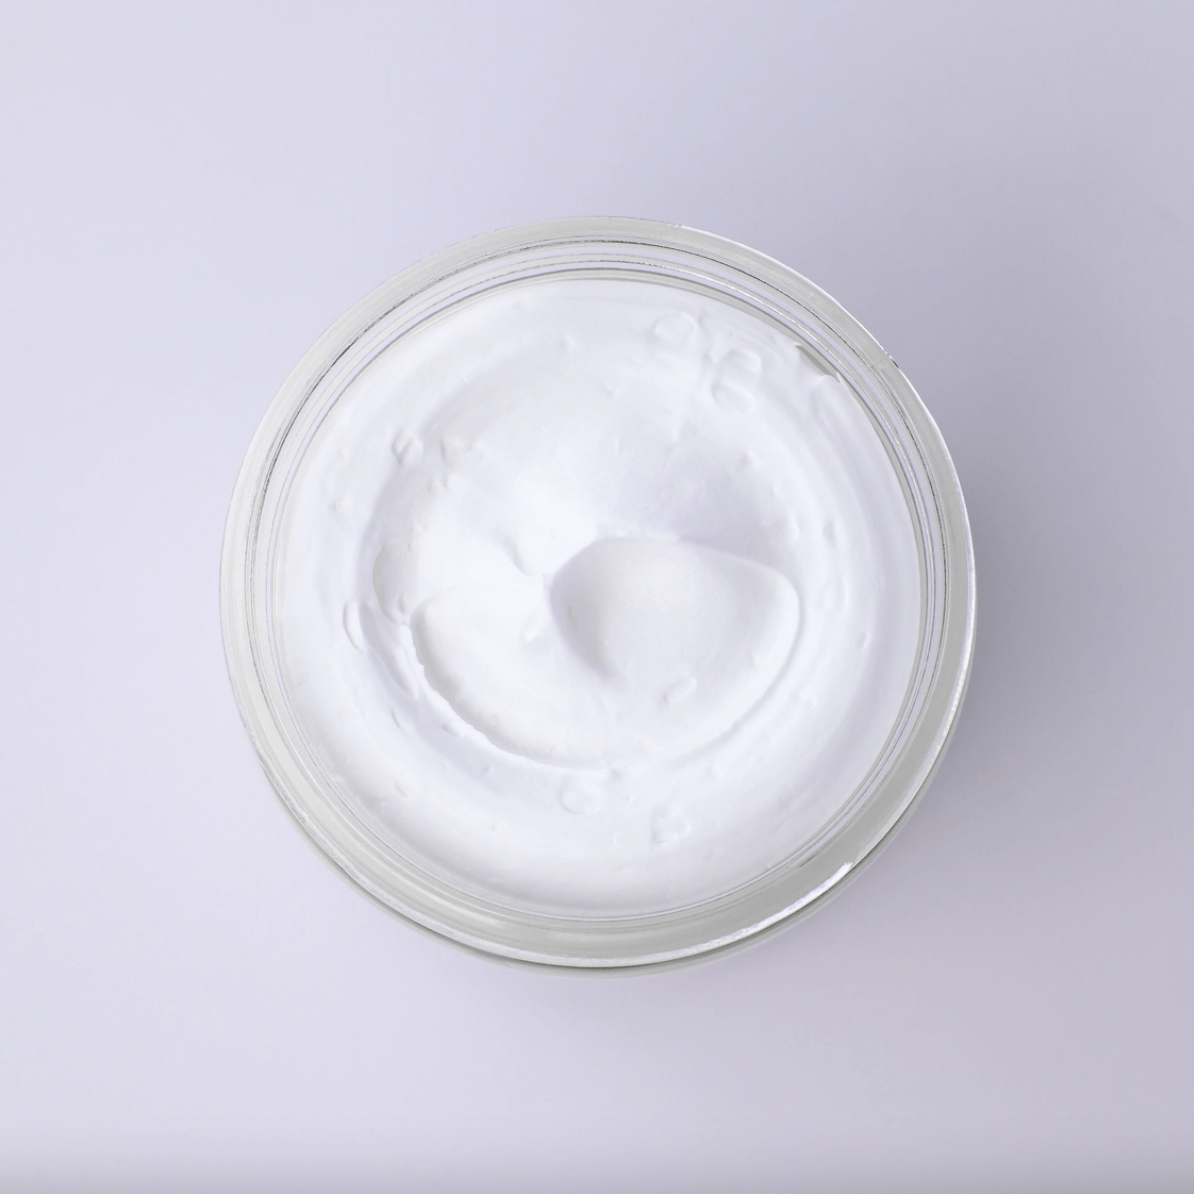 LadyMay Unscented Whipped Tallow 